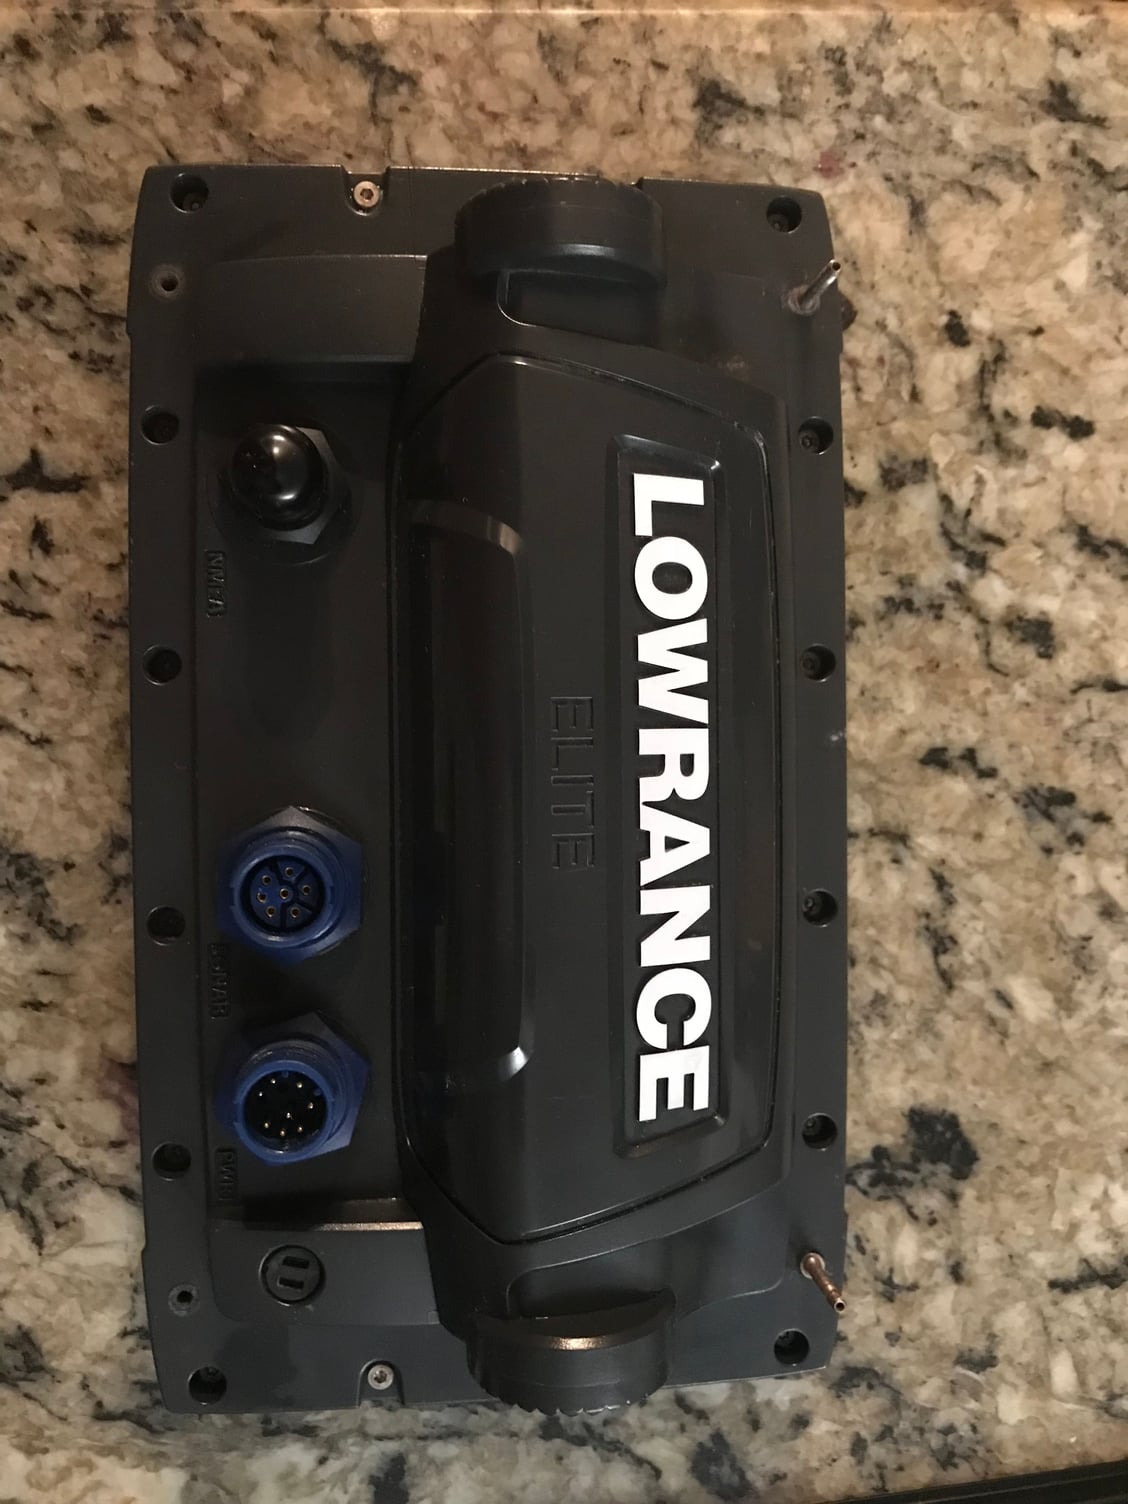 Lowrance Elite 7 HDI For Sale - The Hull Truth - Boating and Fishing Forum